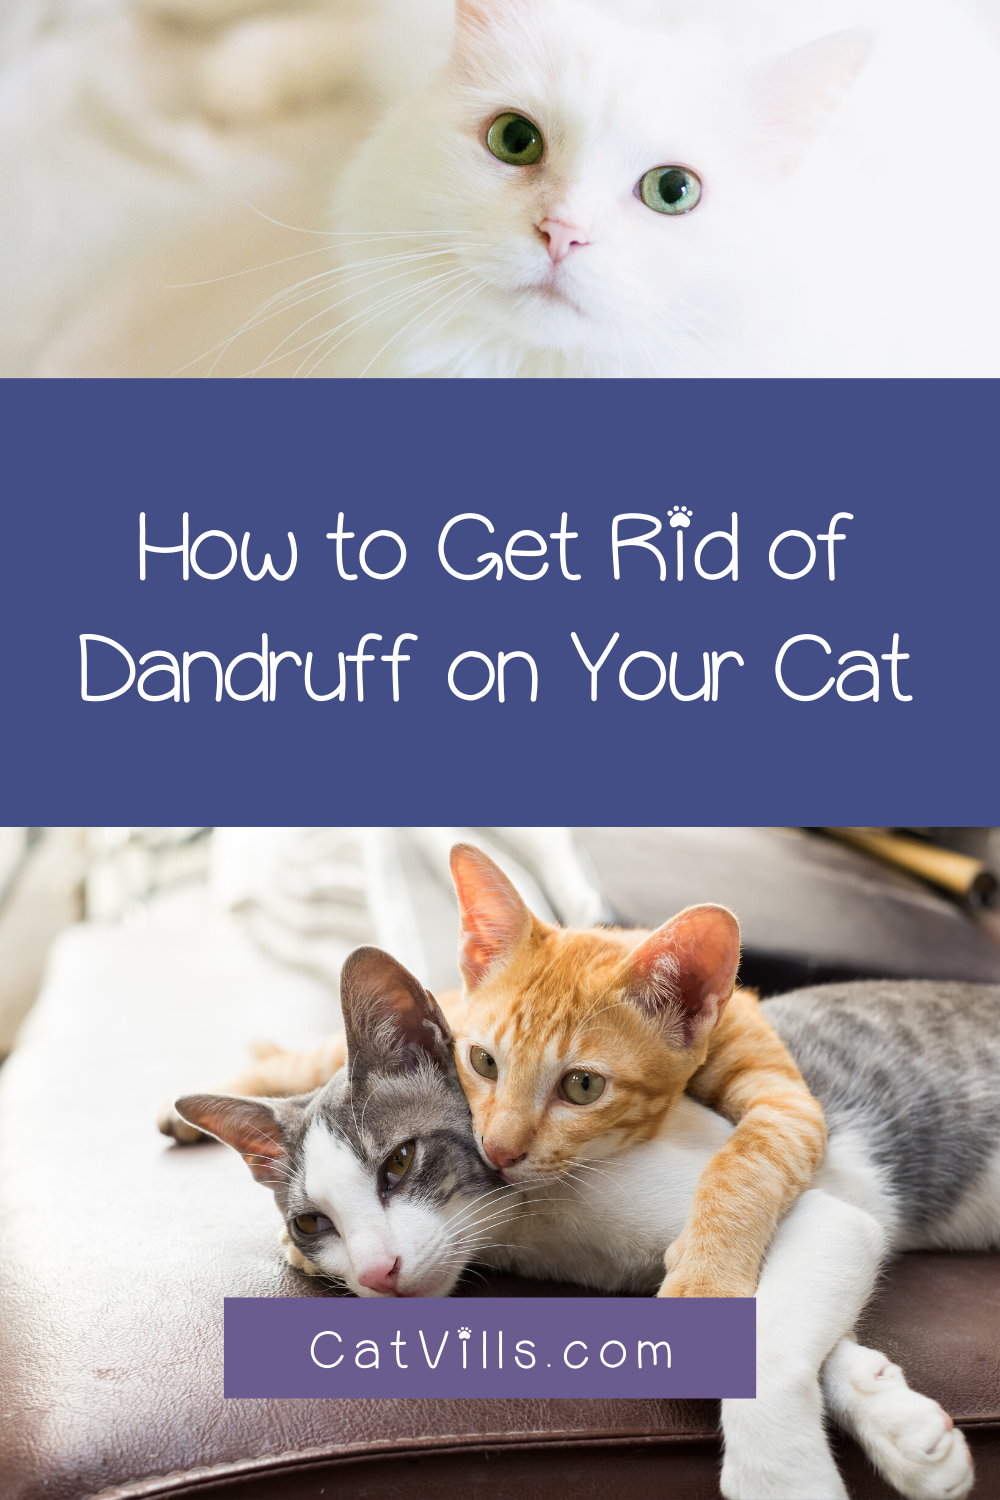 6 Easy Ways to Get Rid of Dandruff on Your Cat